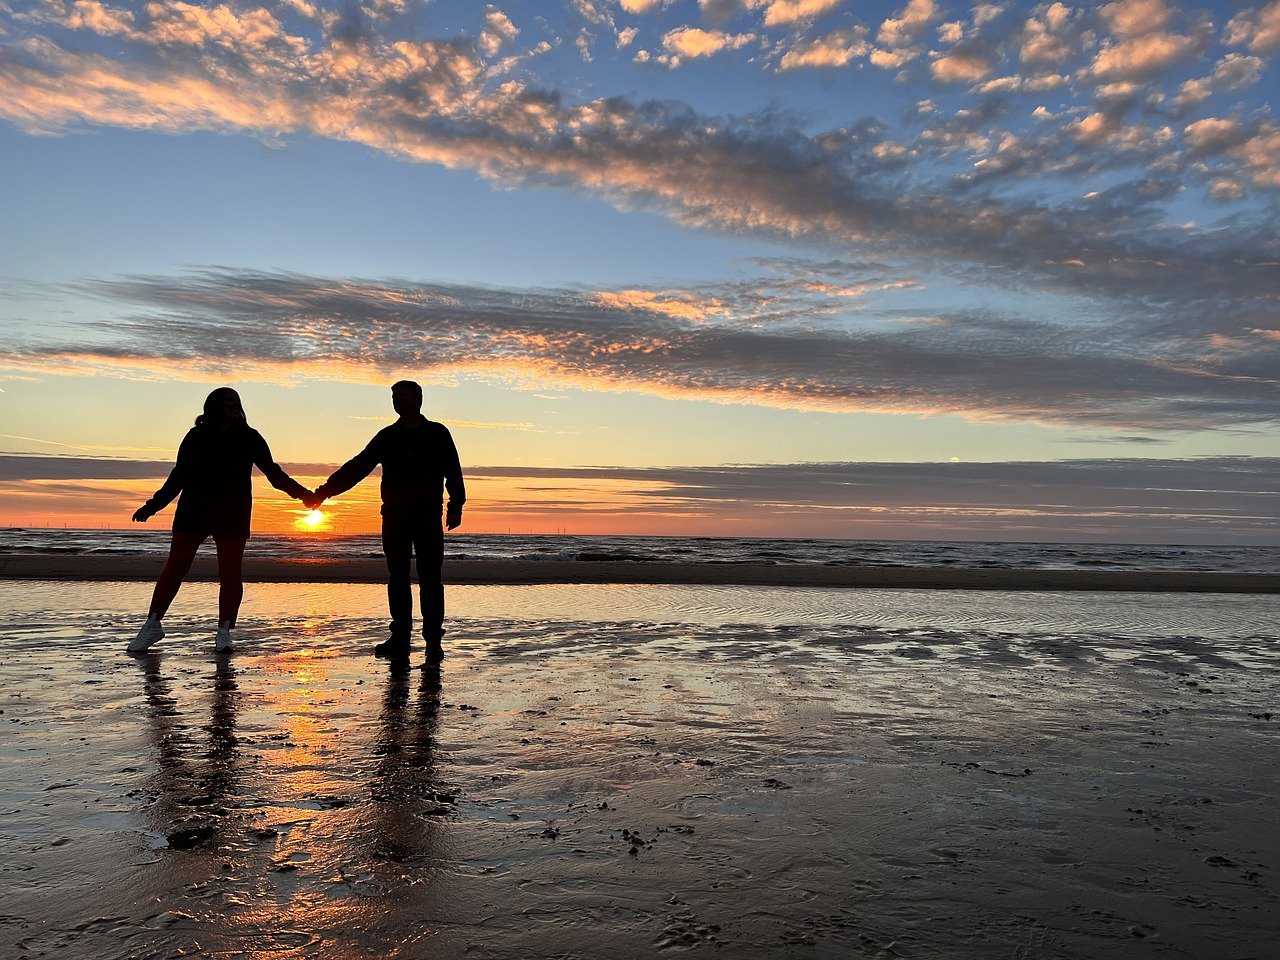 Need romantic travel ideas for Valentine’s Day? Here are 5 that can’t be beat